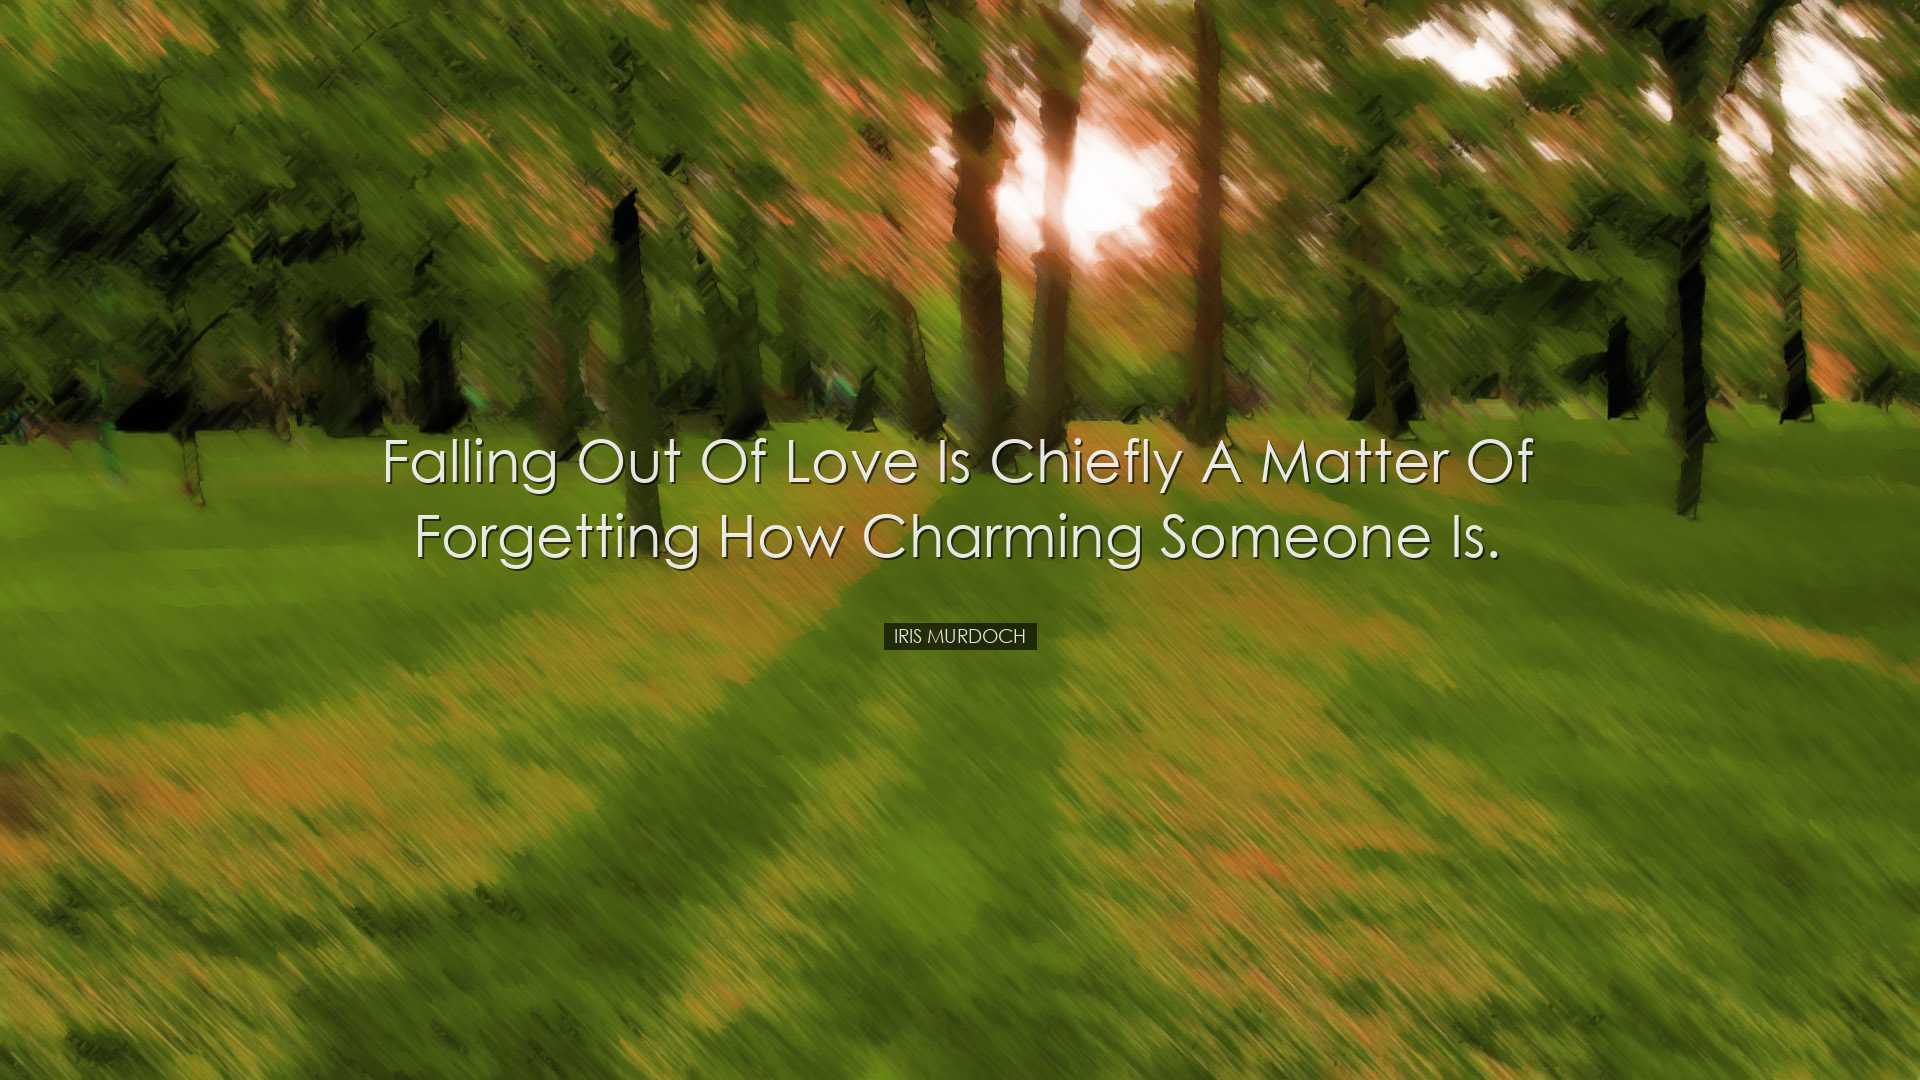 Falling out of love is chiefly a matter of forgetting how charming